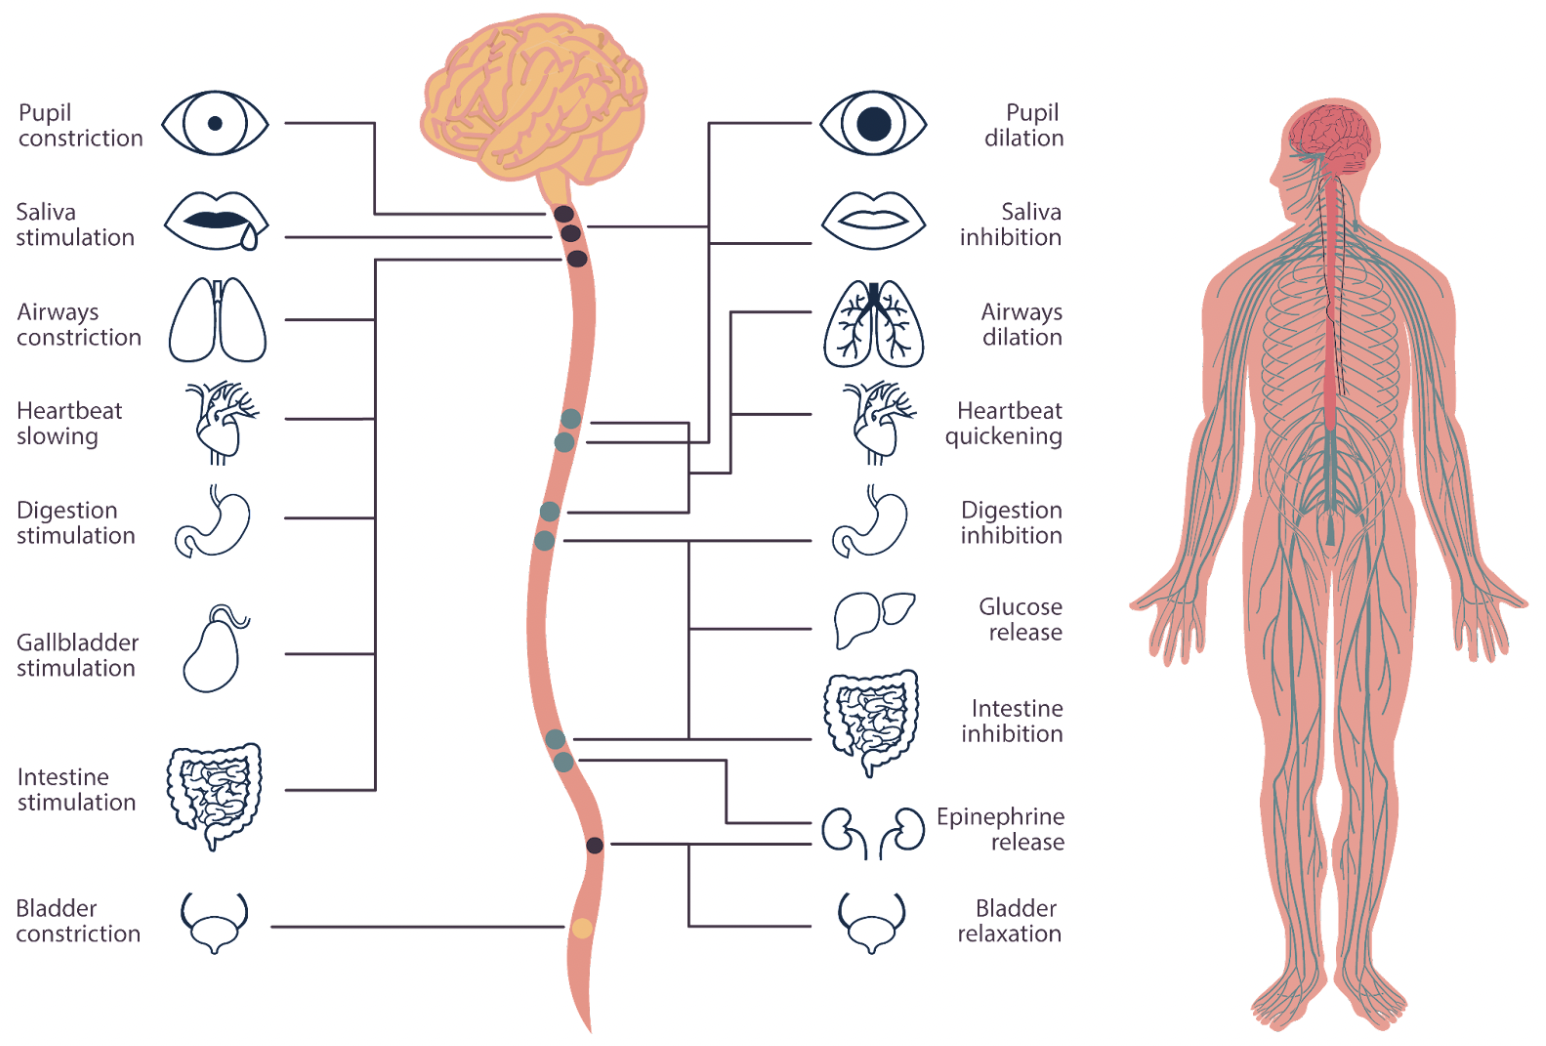 Image of nervous system with different organs drawn out on the left 